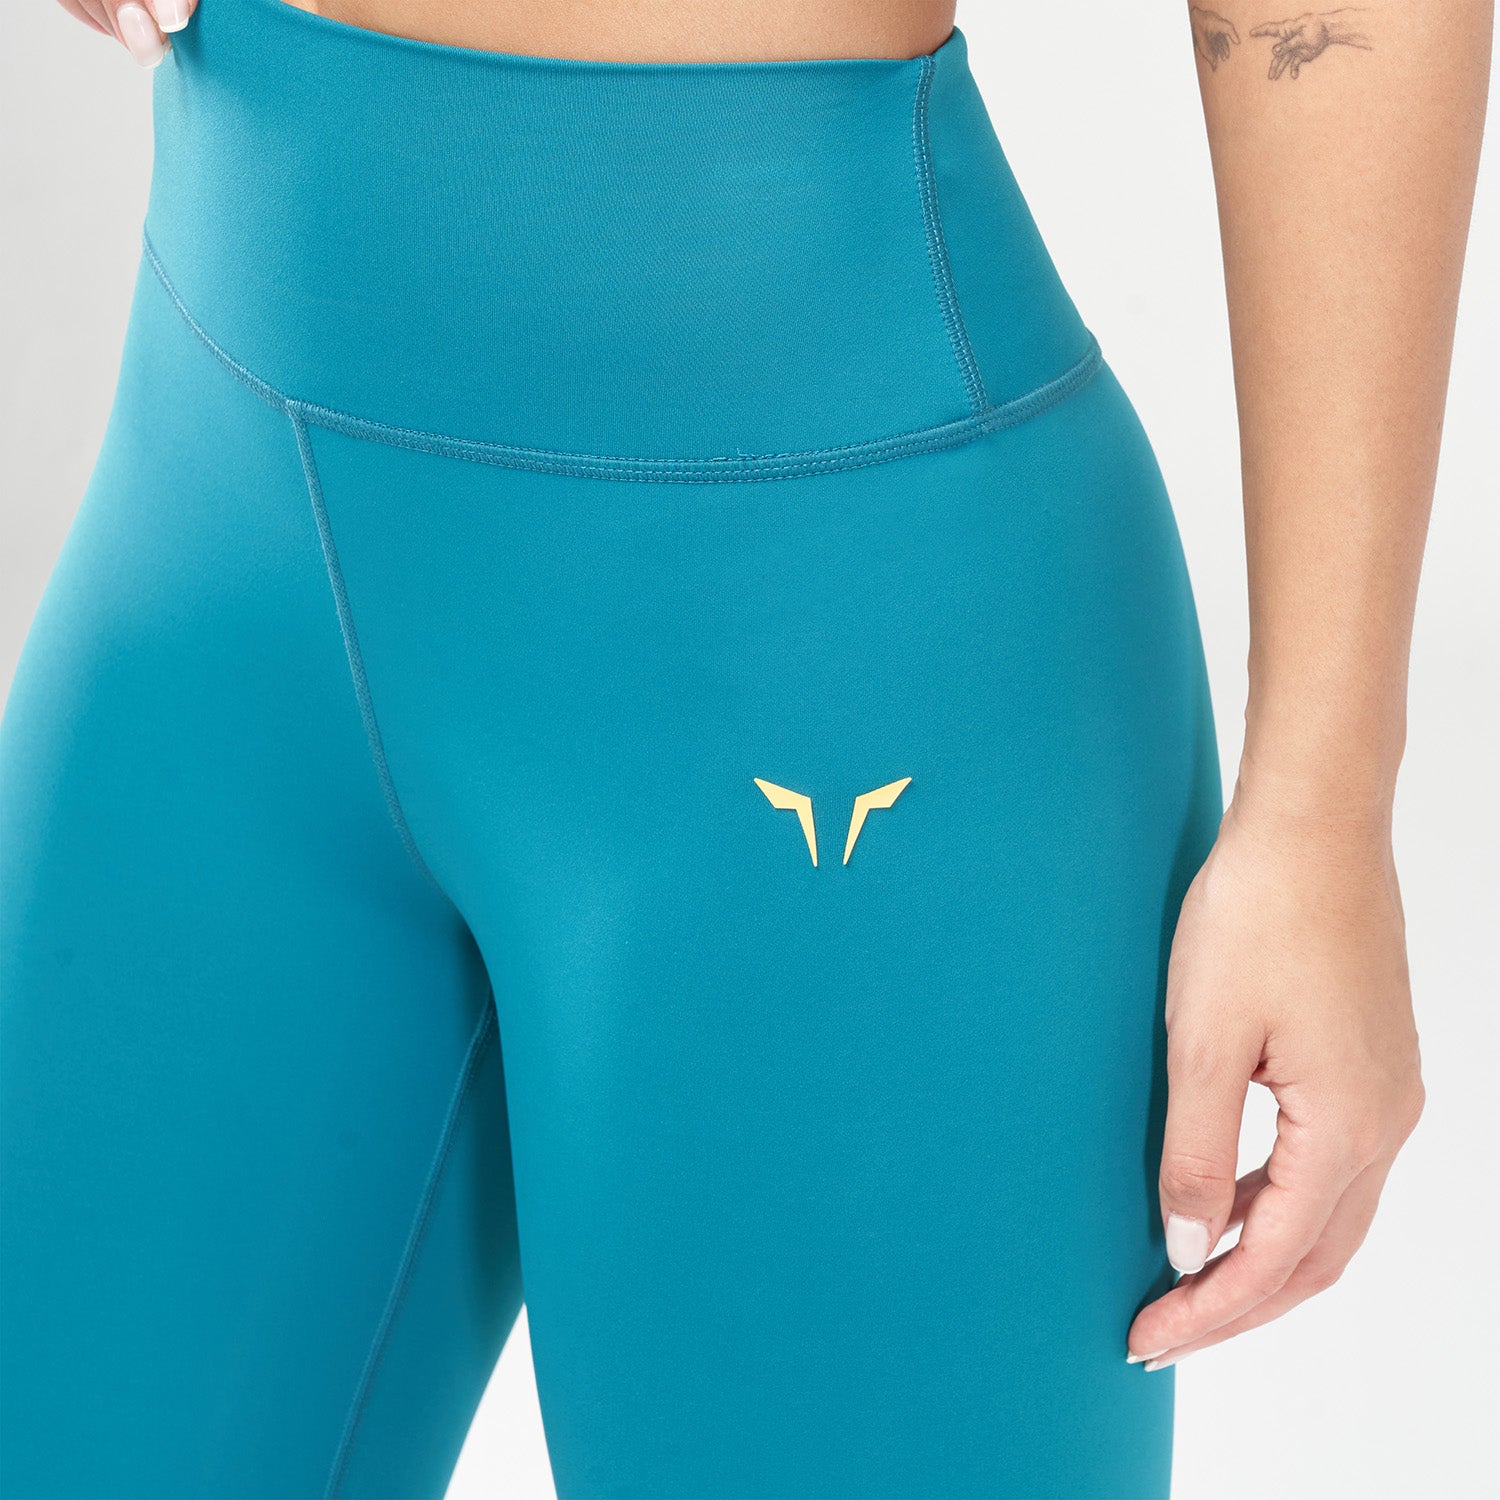 squatwolf-workout-clothes-code-run-the-city-leggings-blue-gym-leggings-for-women